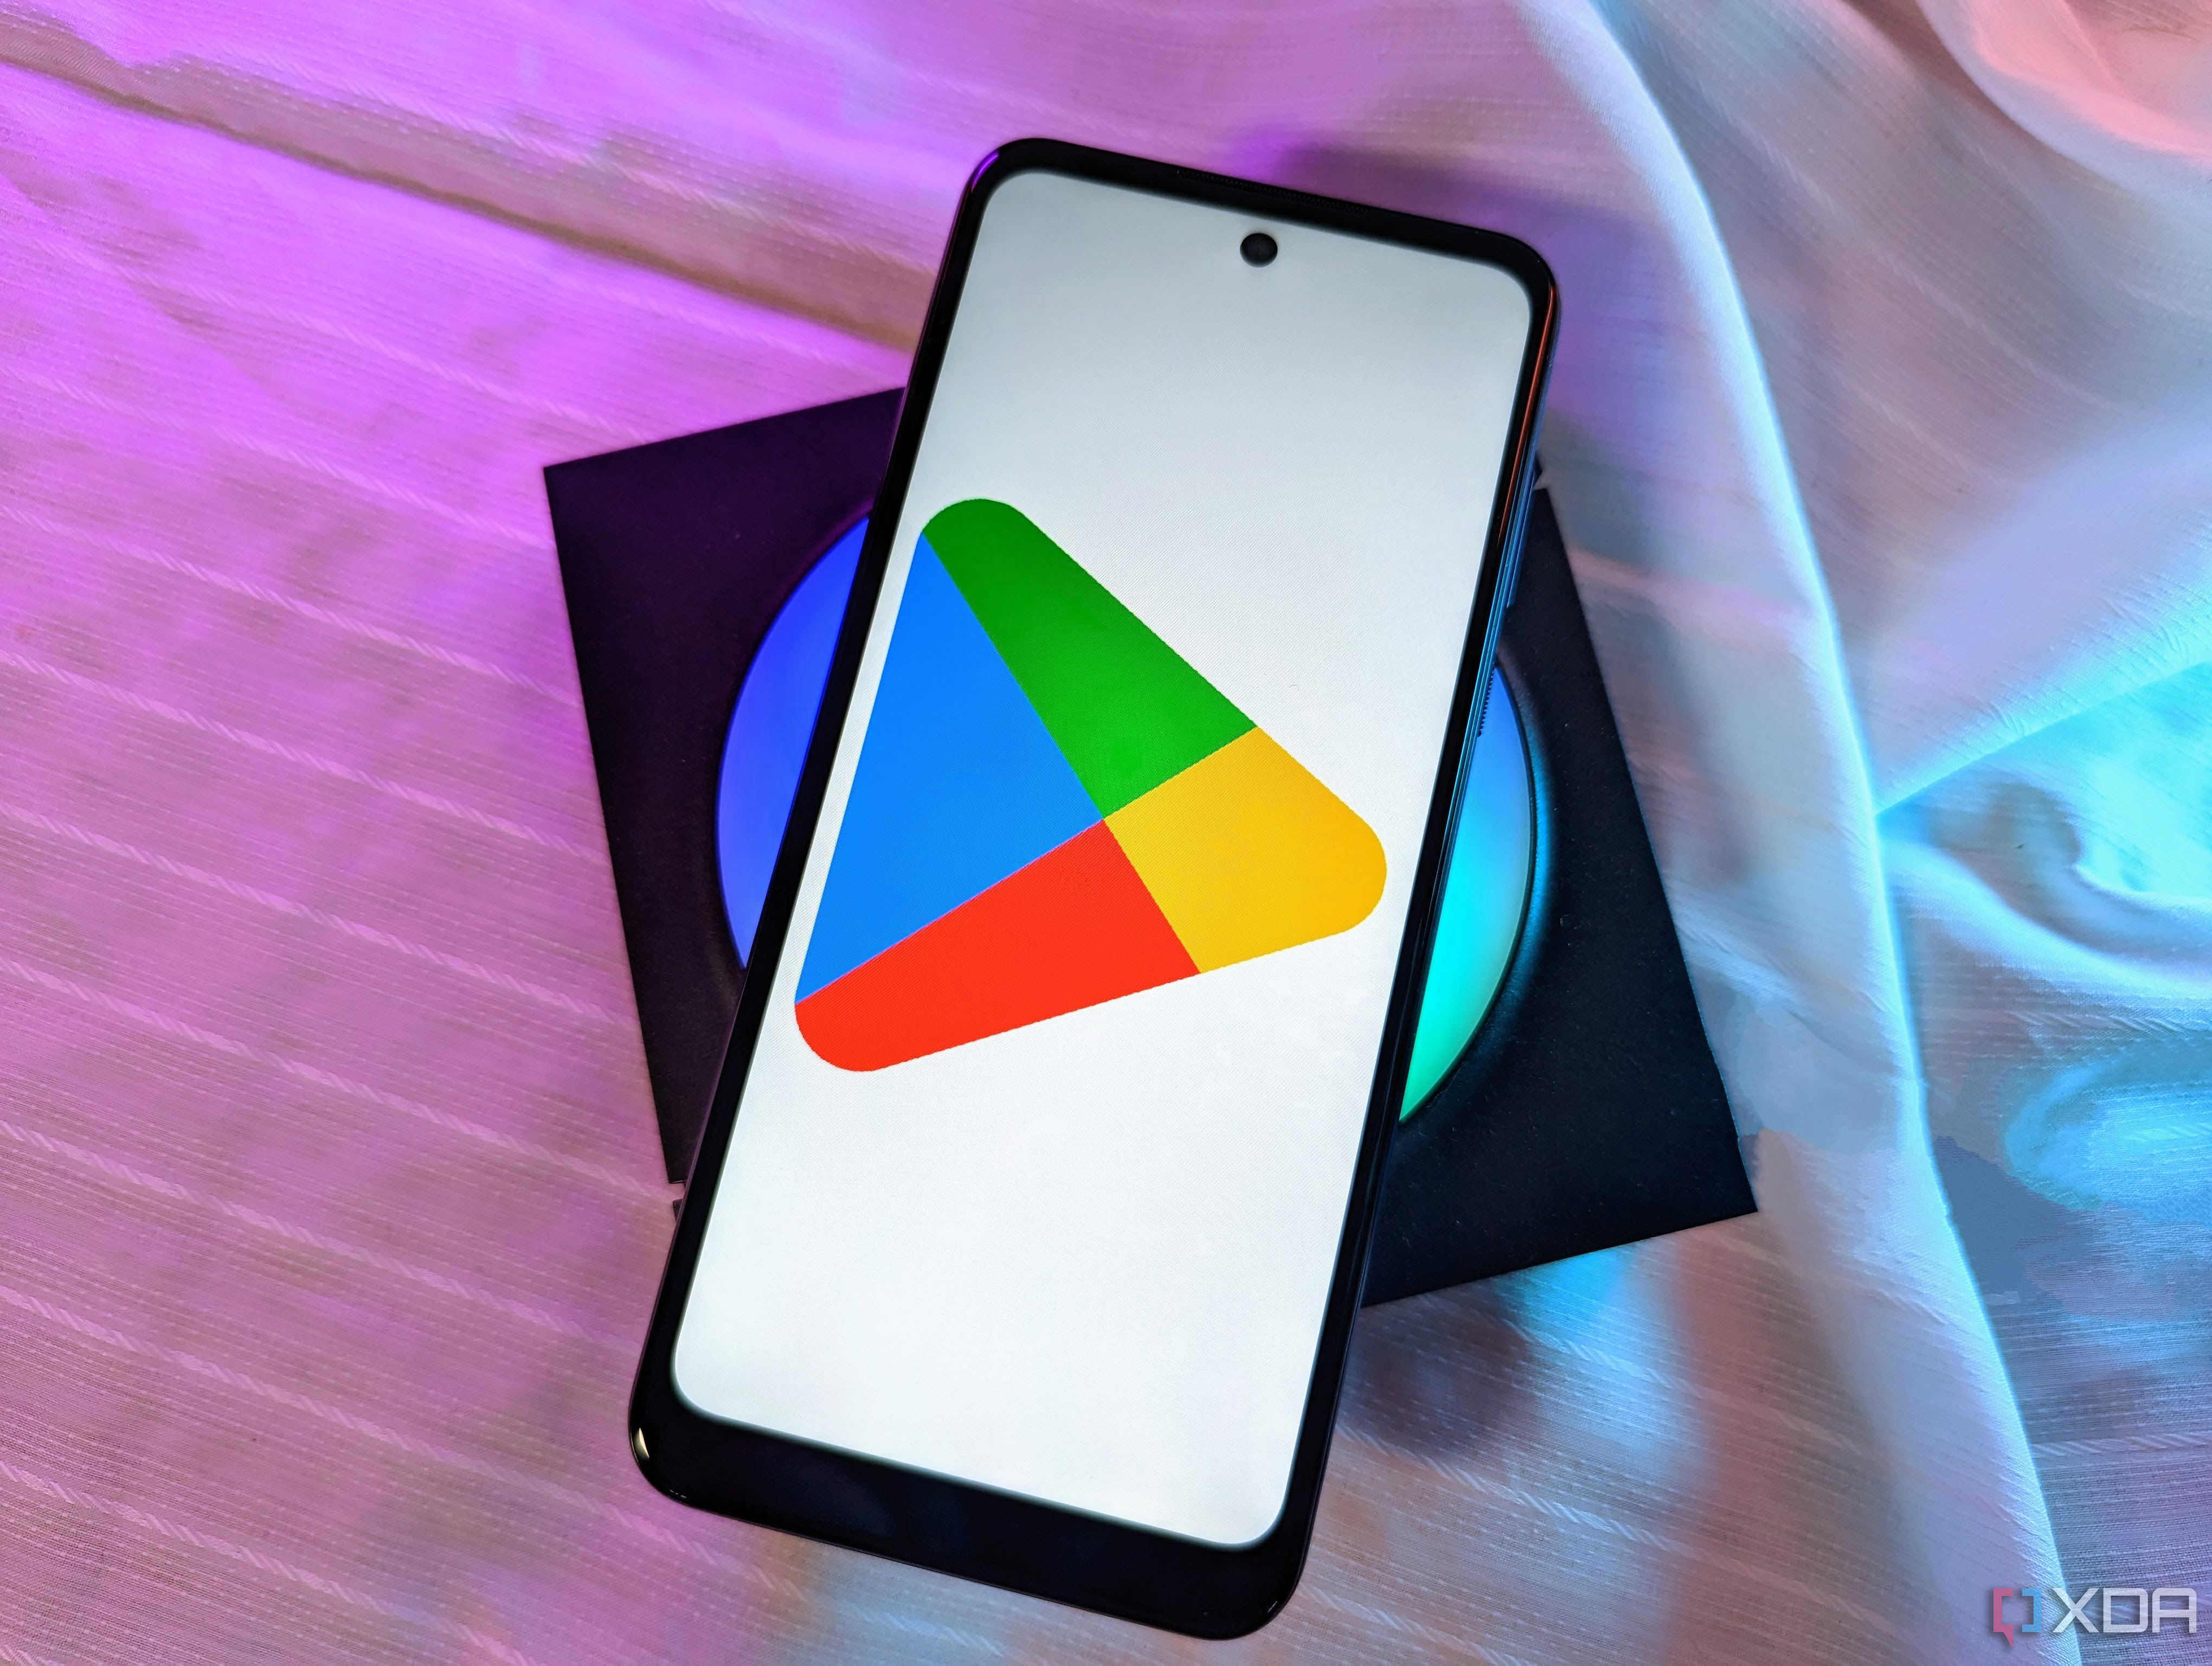 Play store app install free download for android